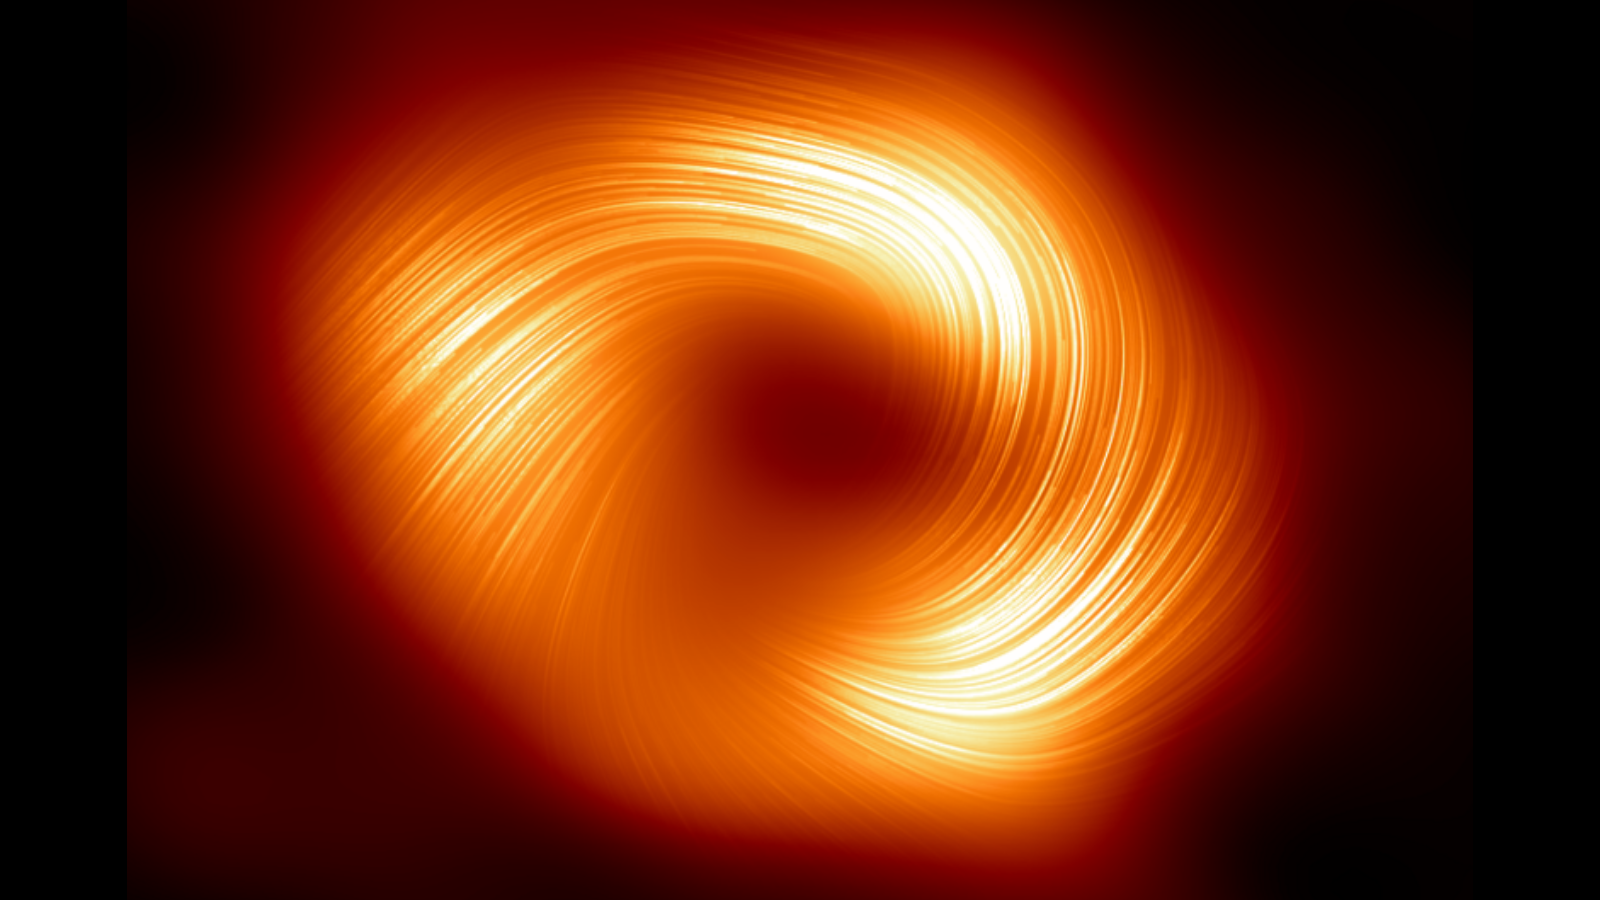 A donut-shaped orange and white striped structure in front of a black background.